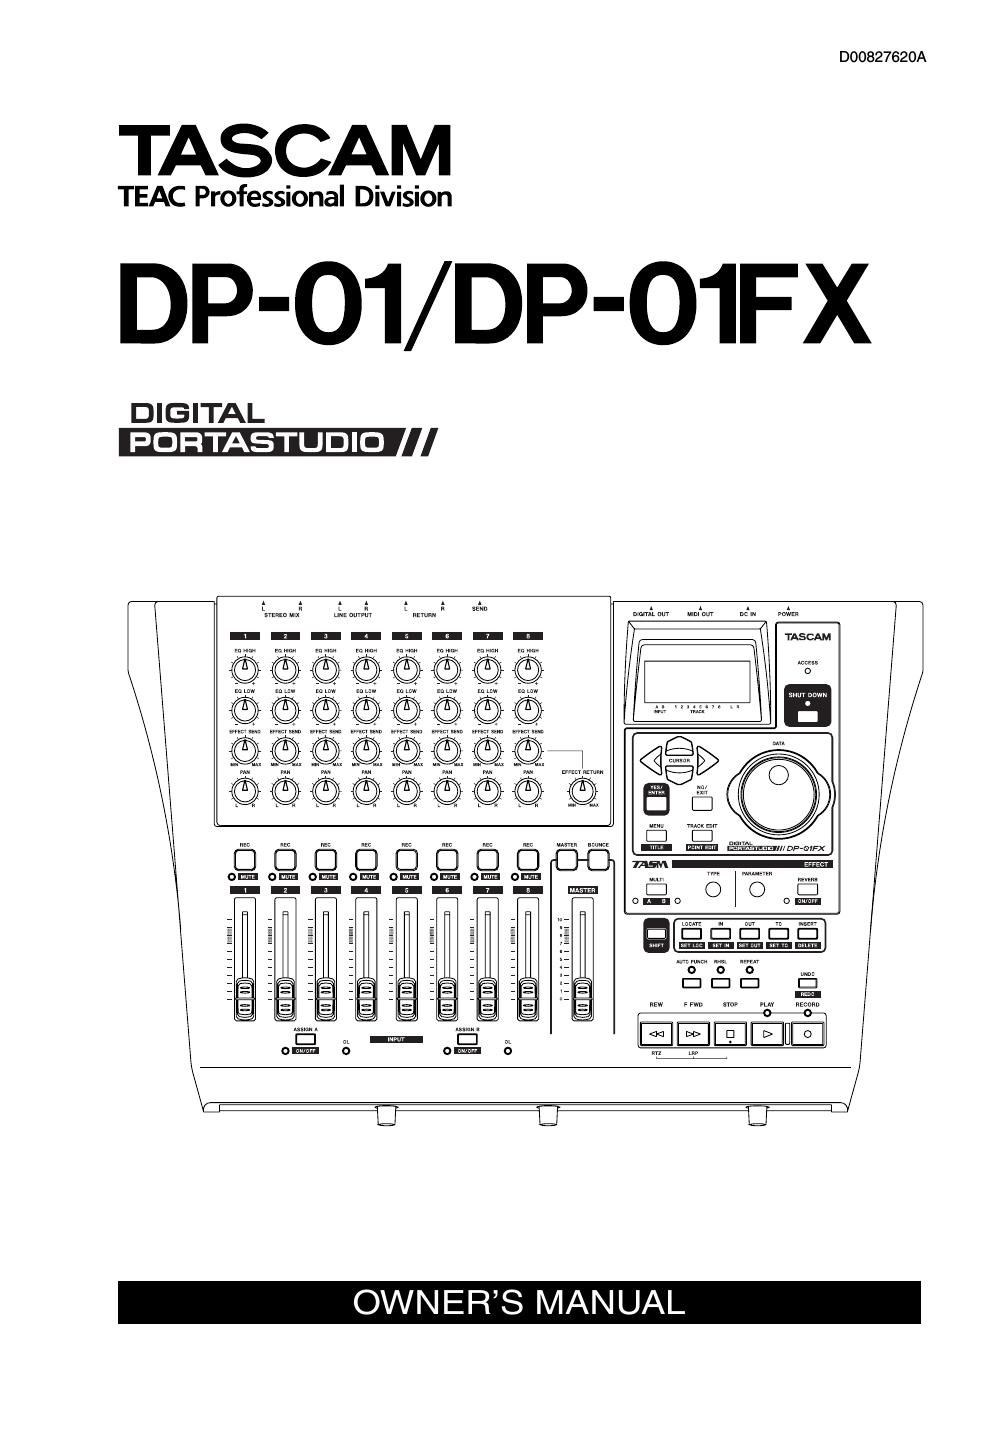 Tascam DP 01FX Owners Manual